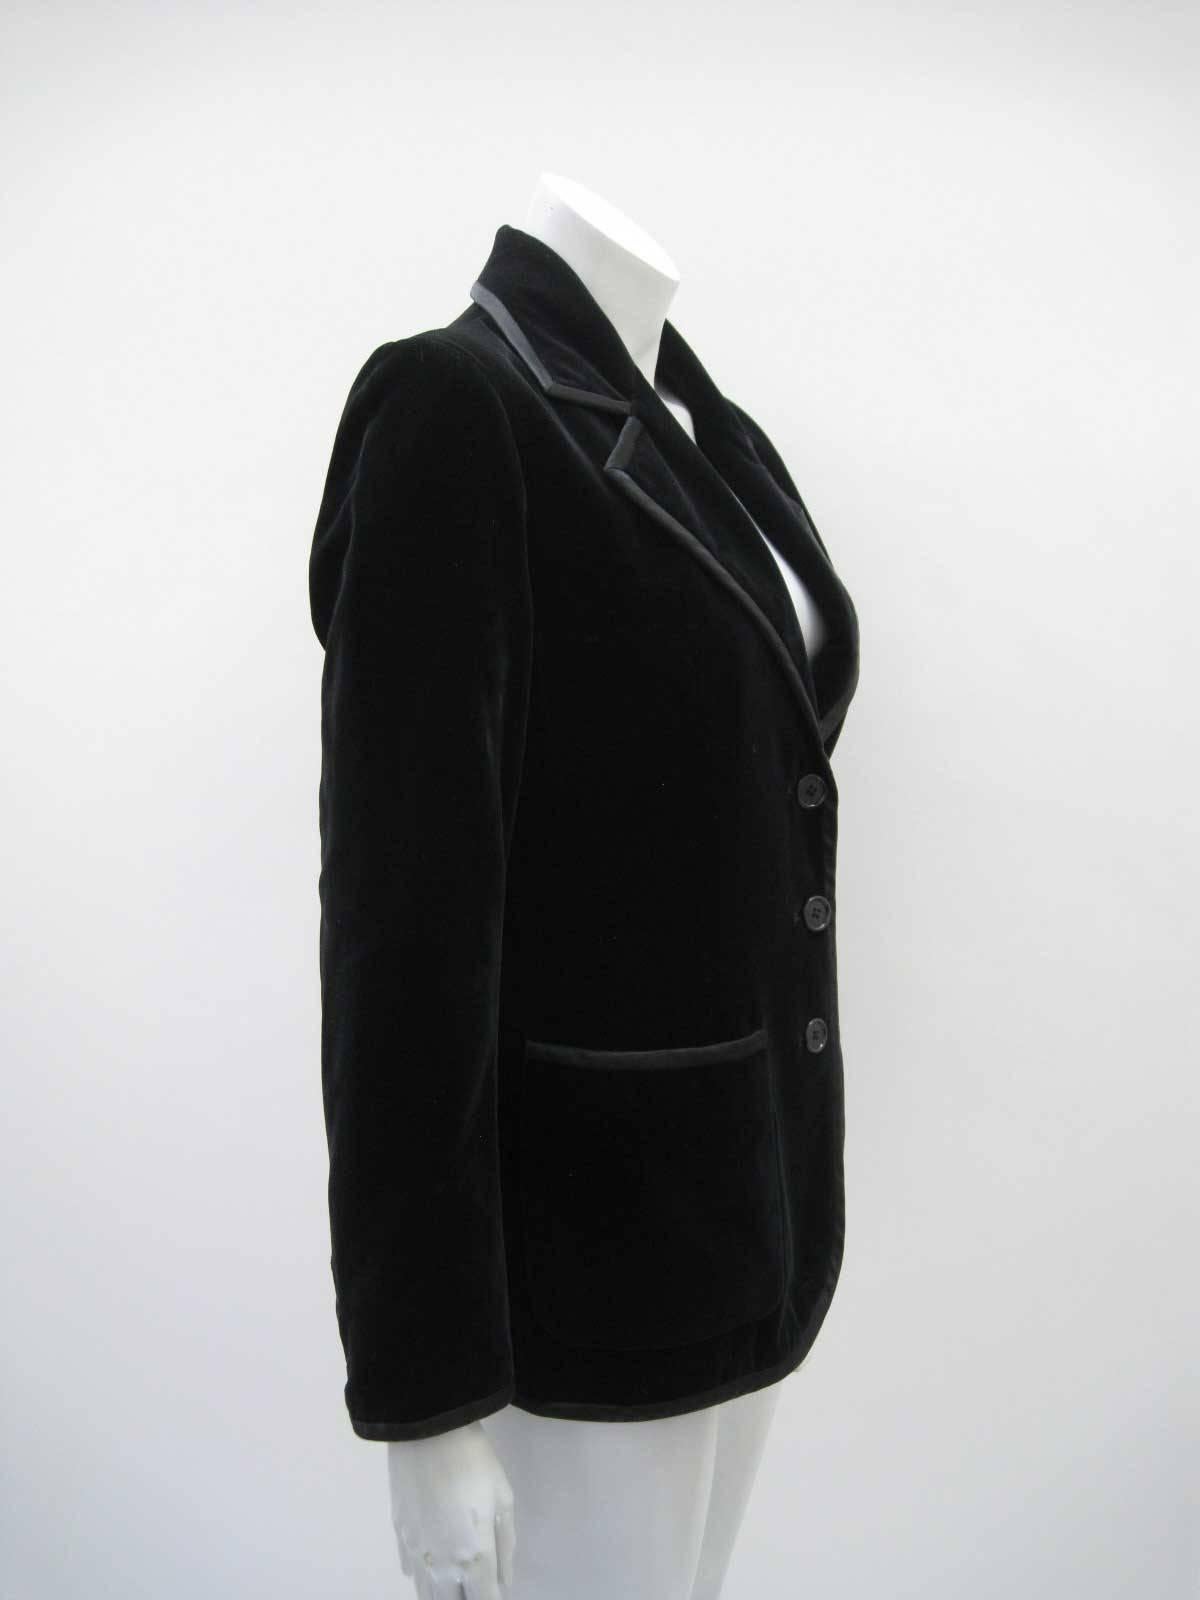 Sumptuous YSL Rive Gauche black velvet blazer.

Soft silk velvet with silk piping.

Fitted shape hits at hip.

Three button closure with three button wrist detail.

One chest pocket and two front patch pockets.

Fully lined.

Tagged size 10.

This